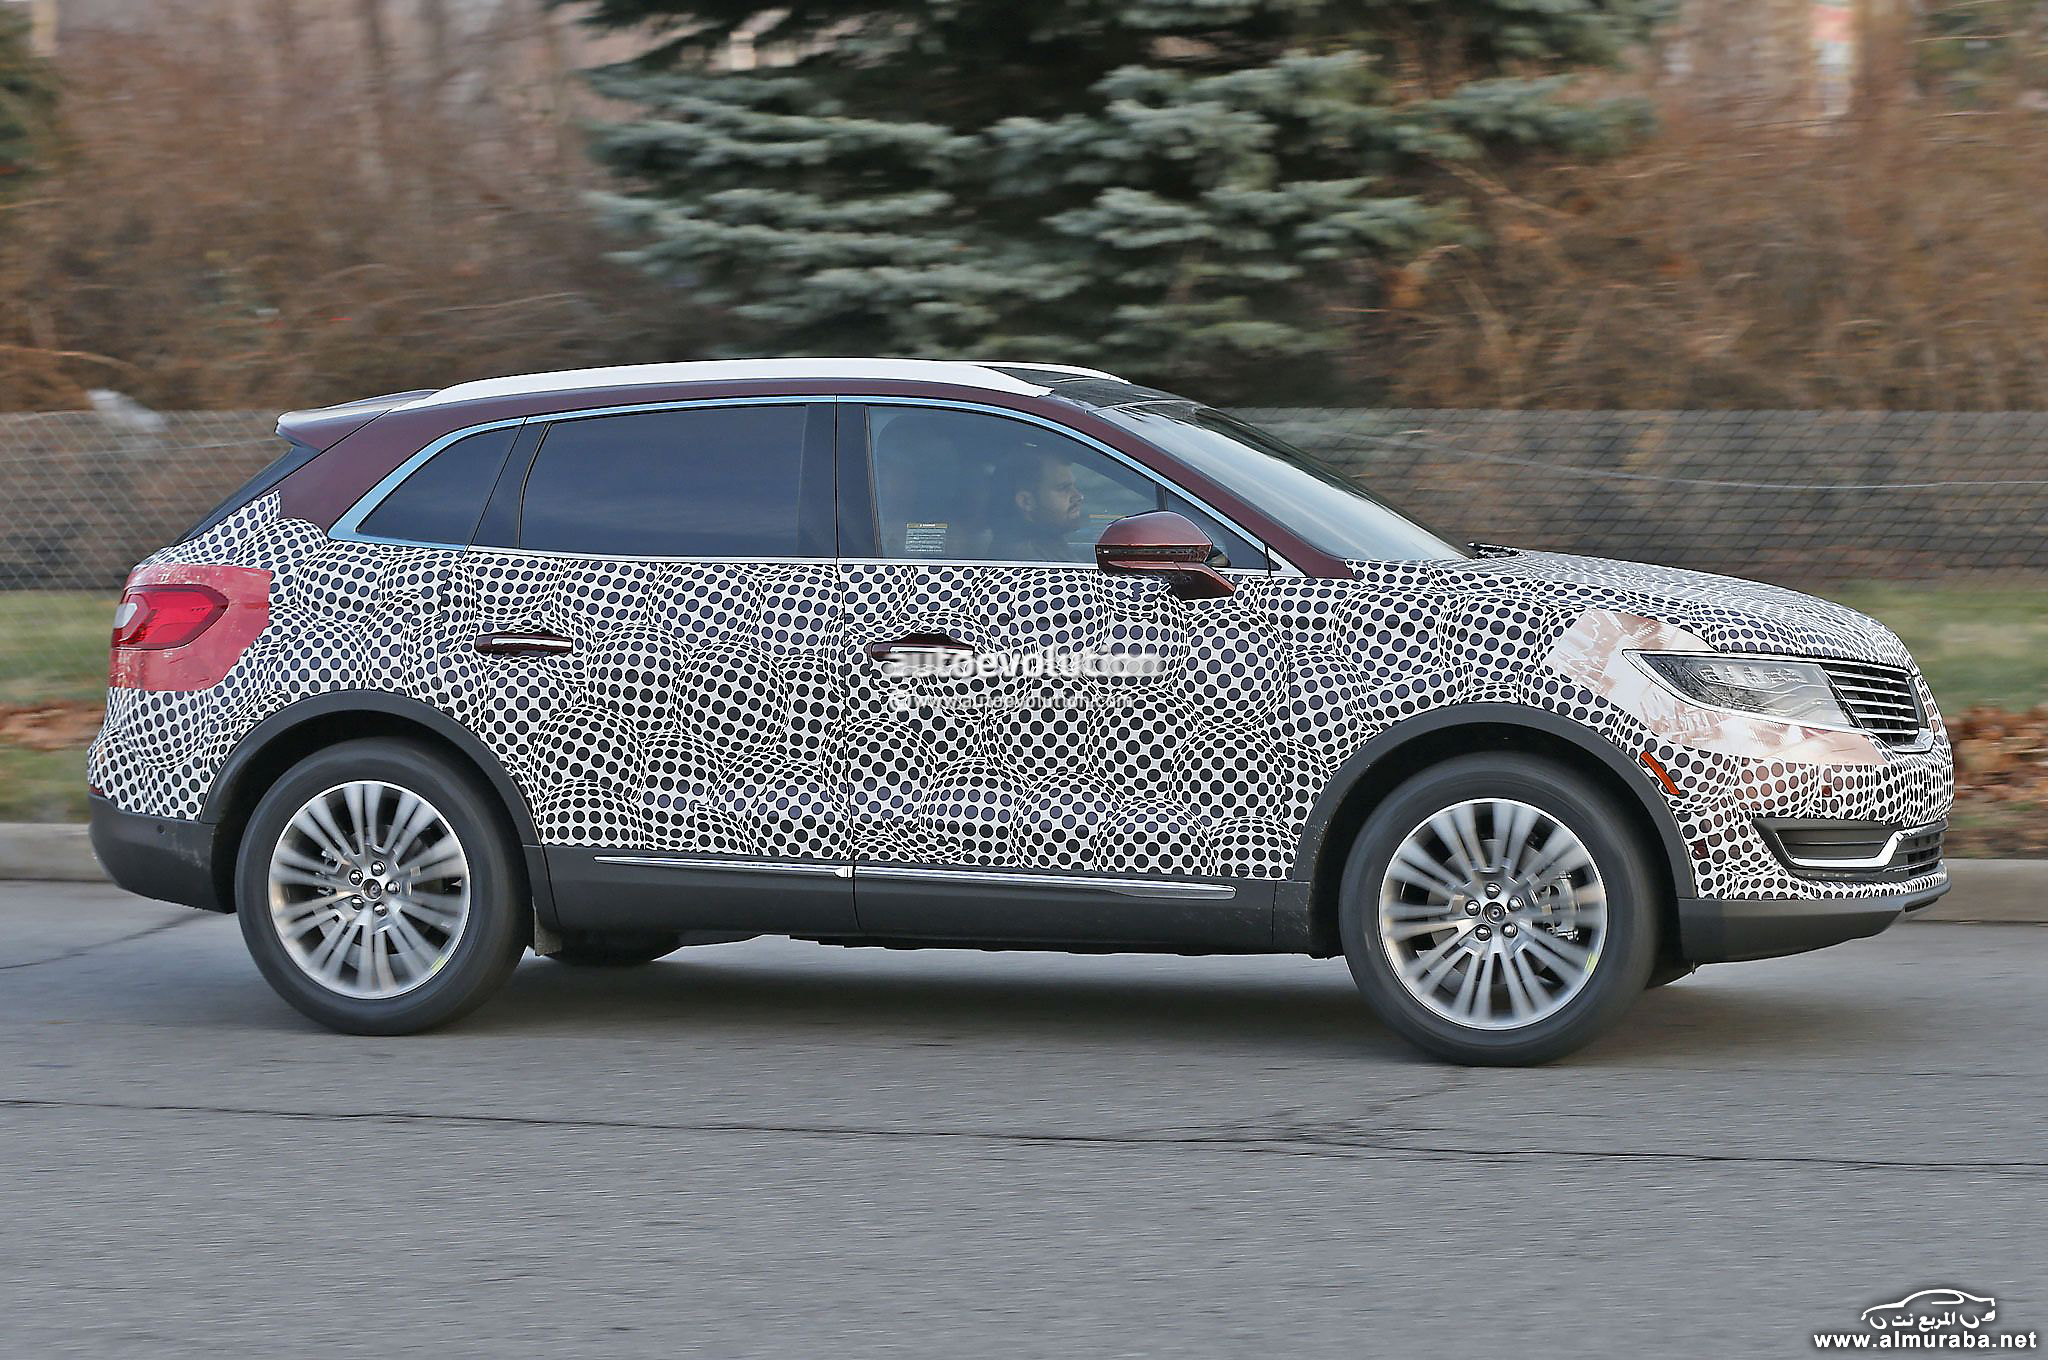 2016-lincoln-mkx-spied-in-production-ready-guise-photo-gallery_6